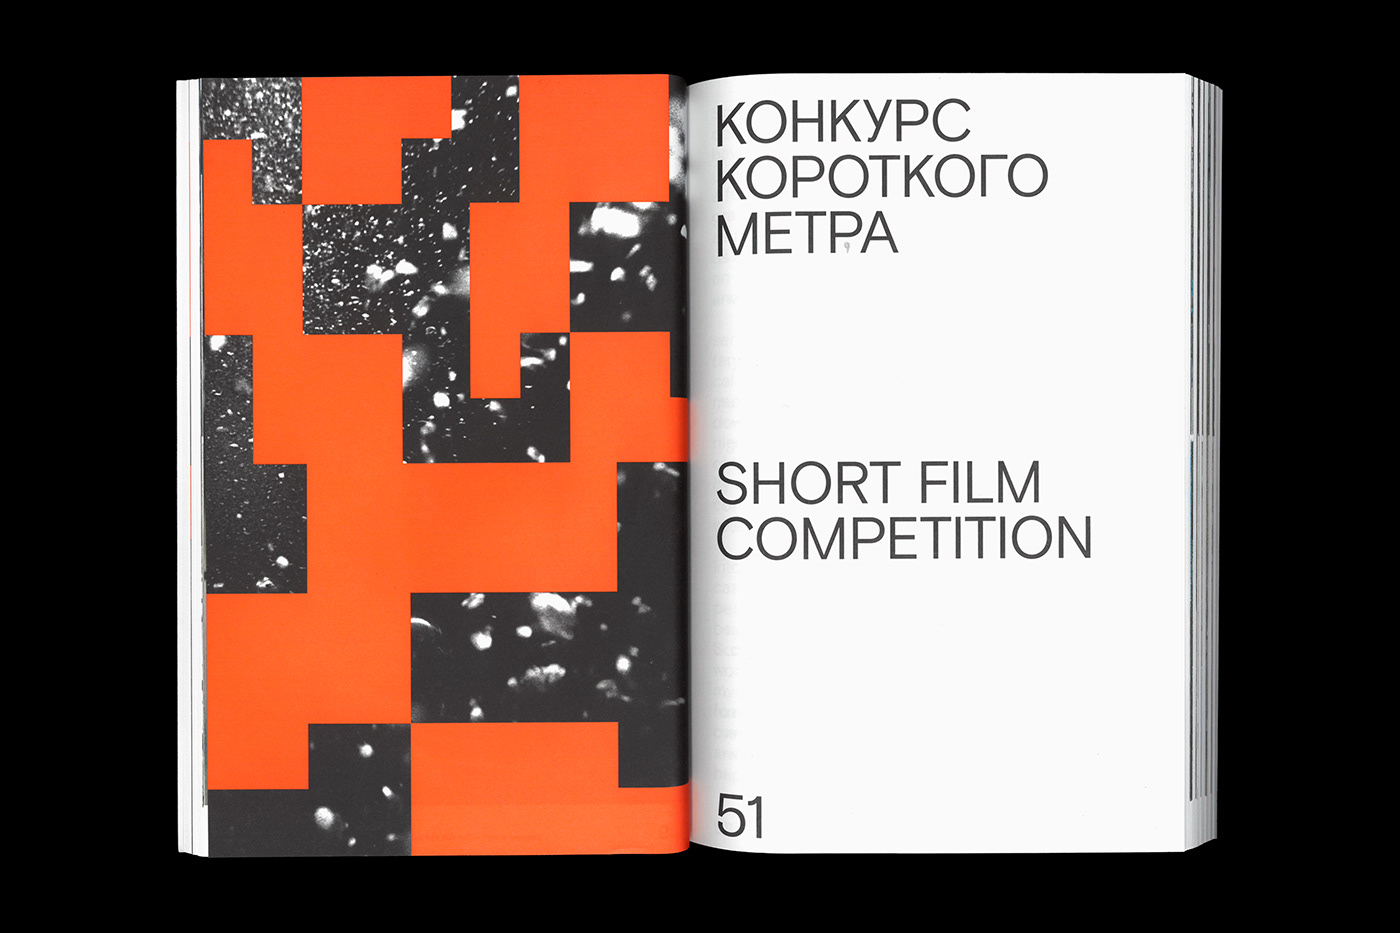 art direction  brand identity cinematography culture editorial festival Film   identity Layout Outdoor